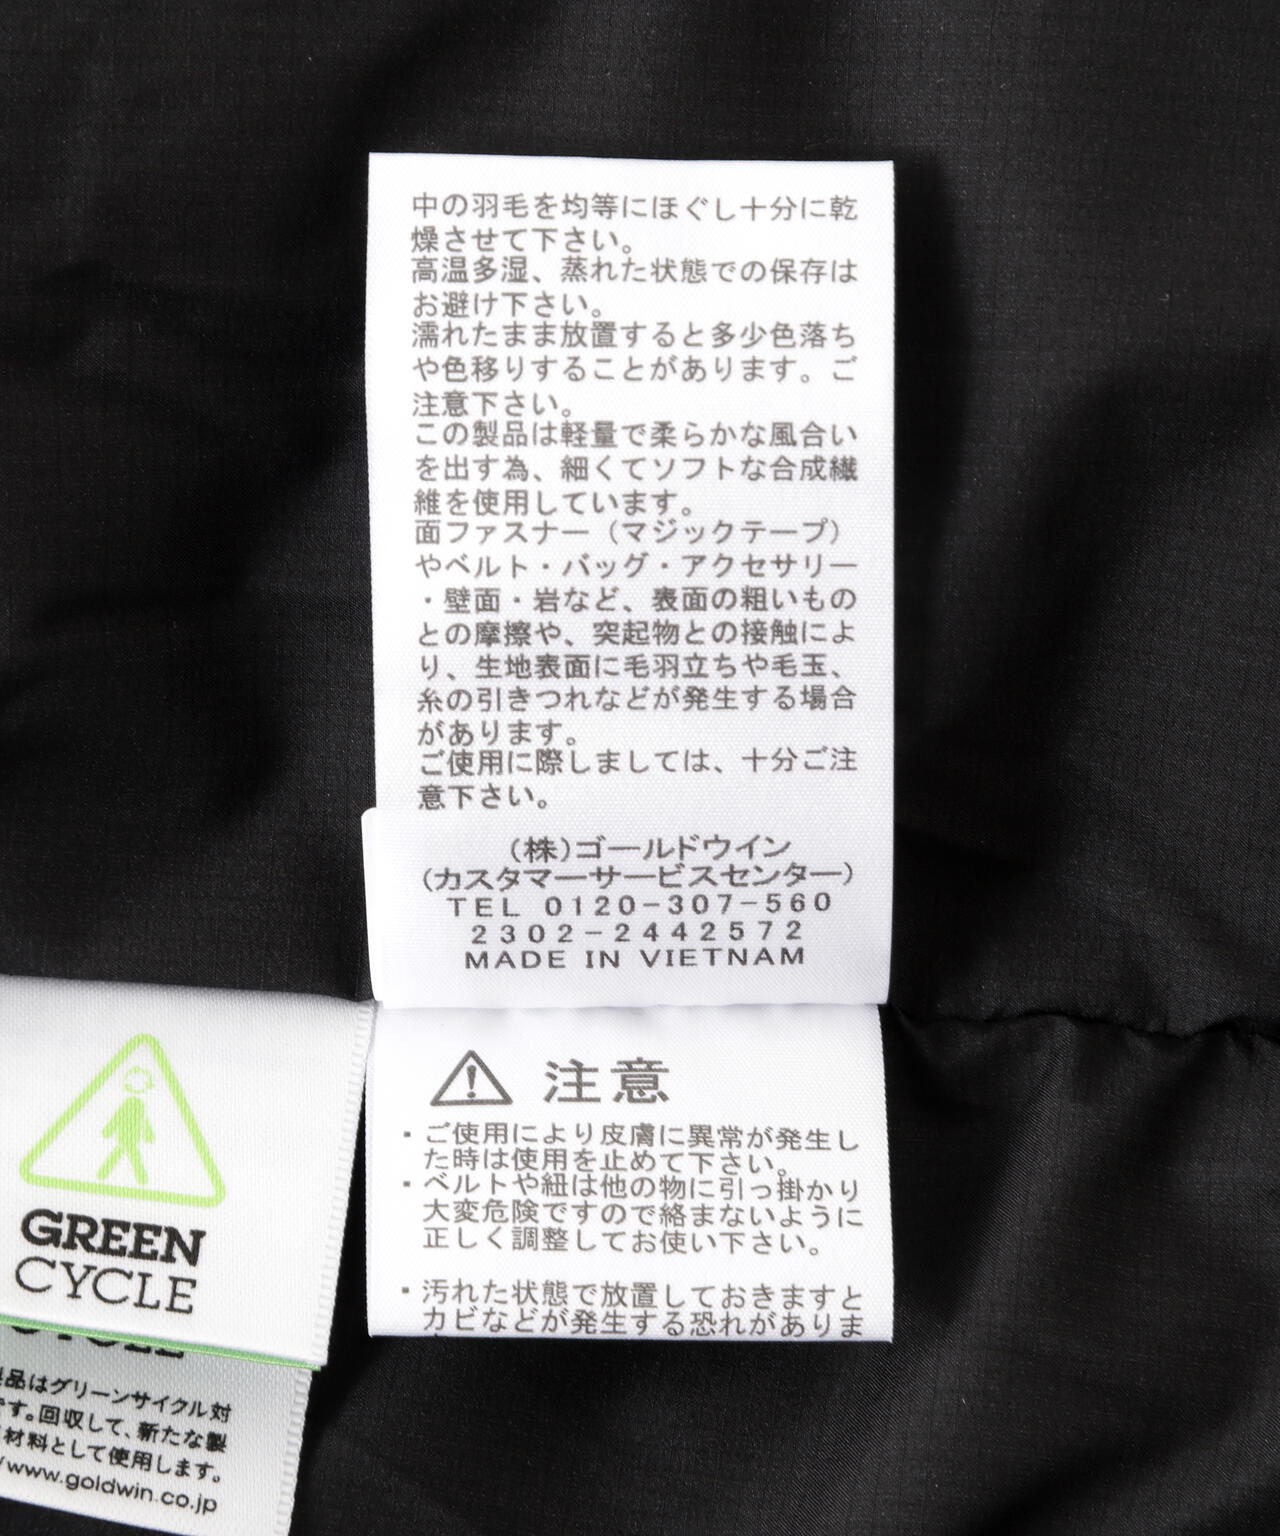 THE NORTH FACE (ザ・ノースフェイス）Alteration Sierra Jacket ND92361